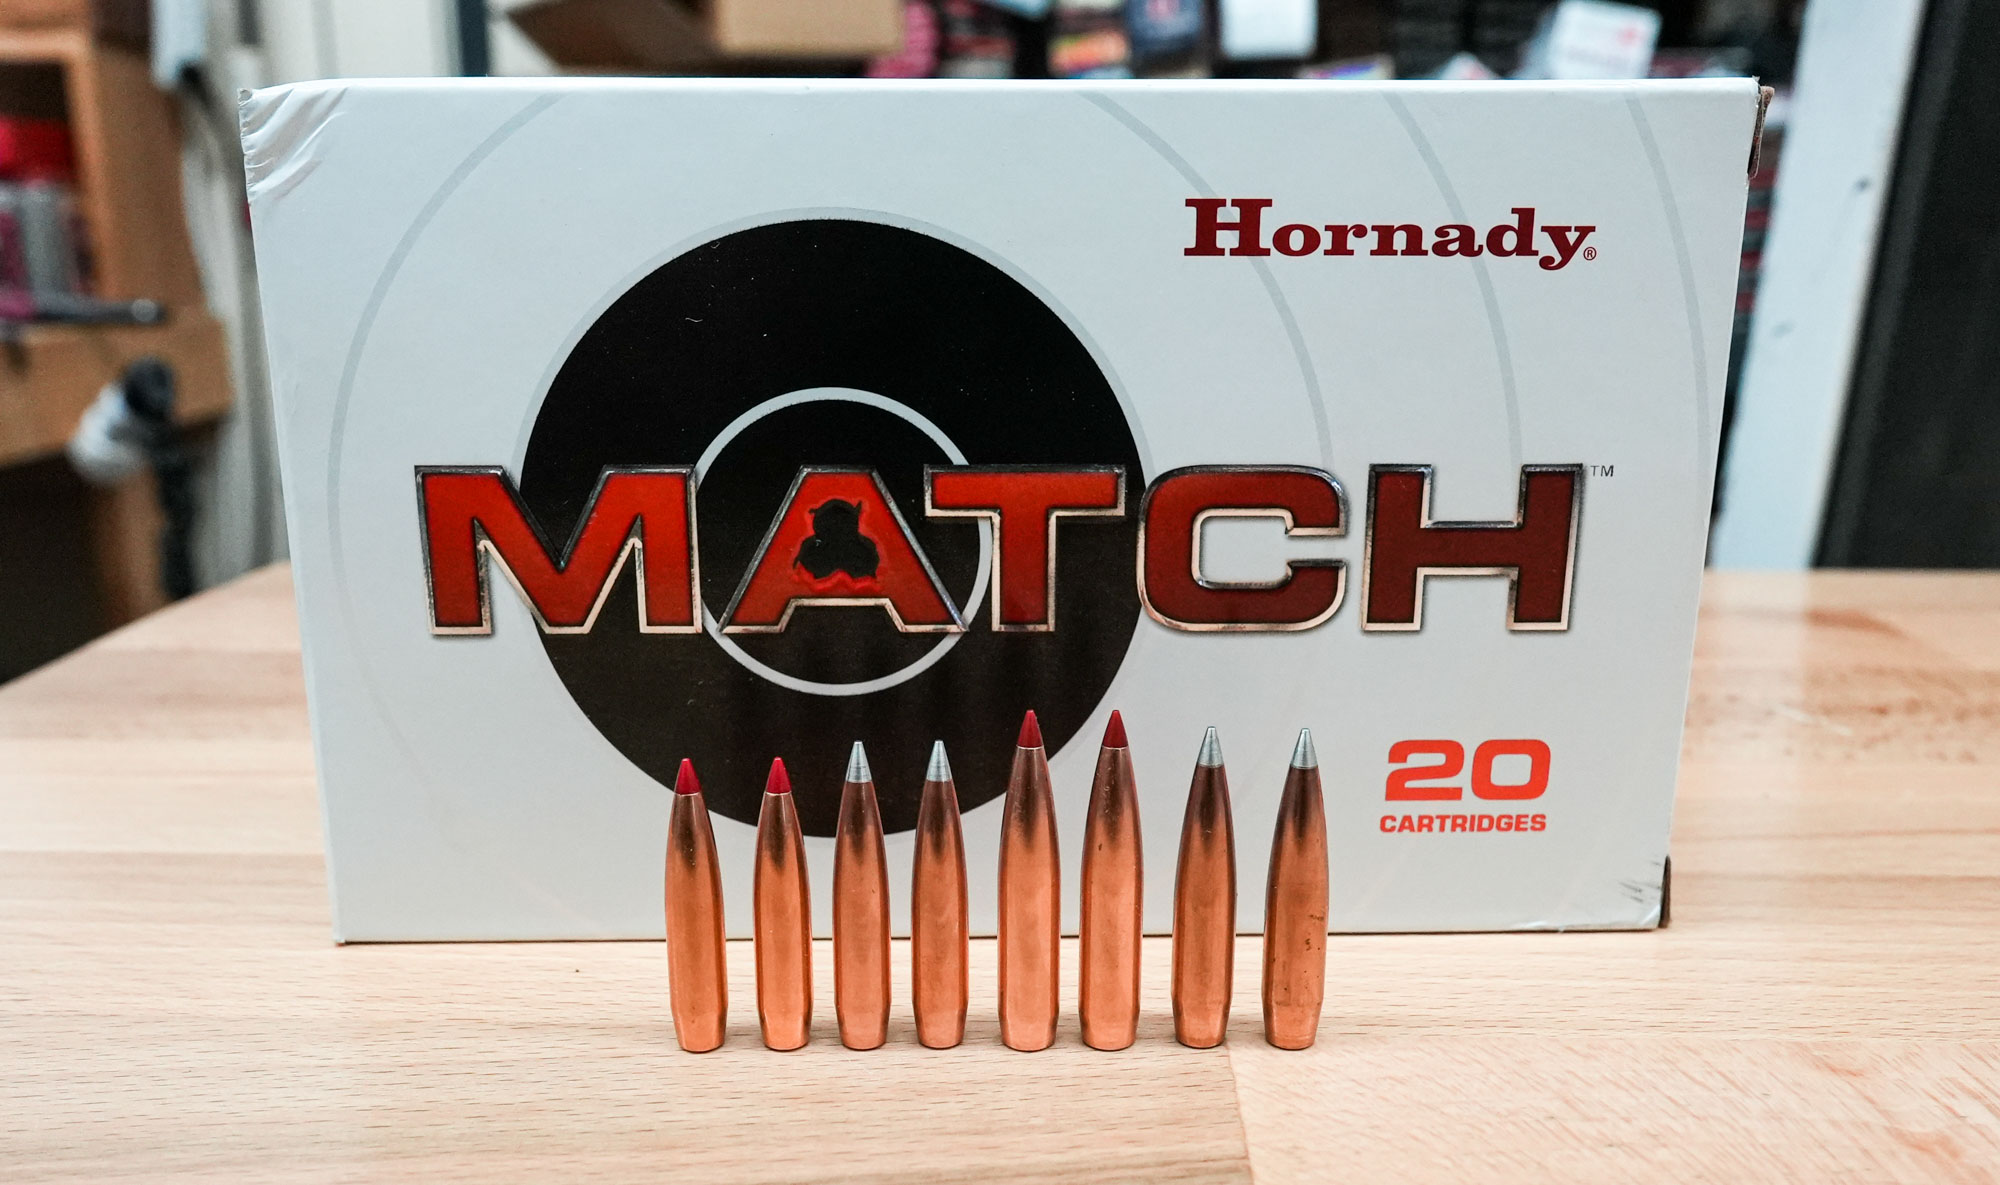 Though both ELD-Ms and A-TIPs are match bullets, only ELD-Ms (with the red tips) are factory loaded by Hornady.